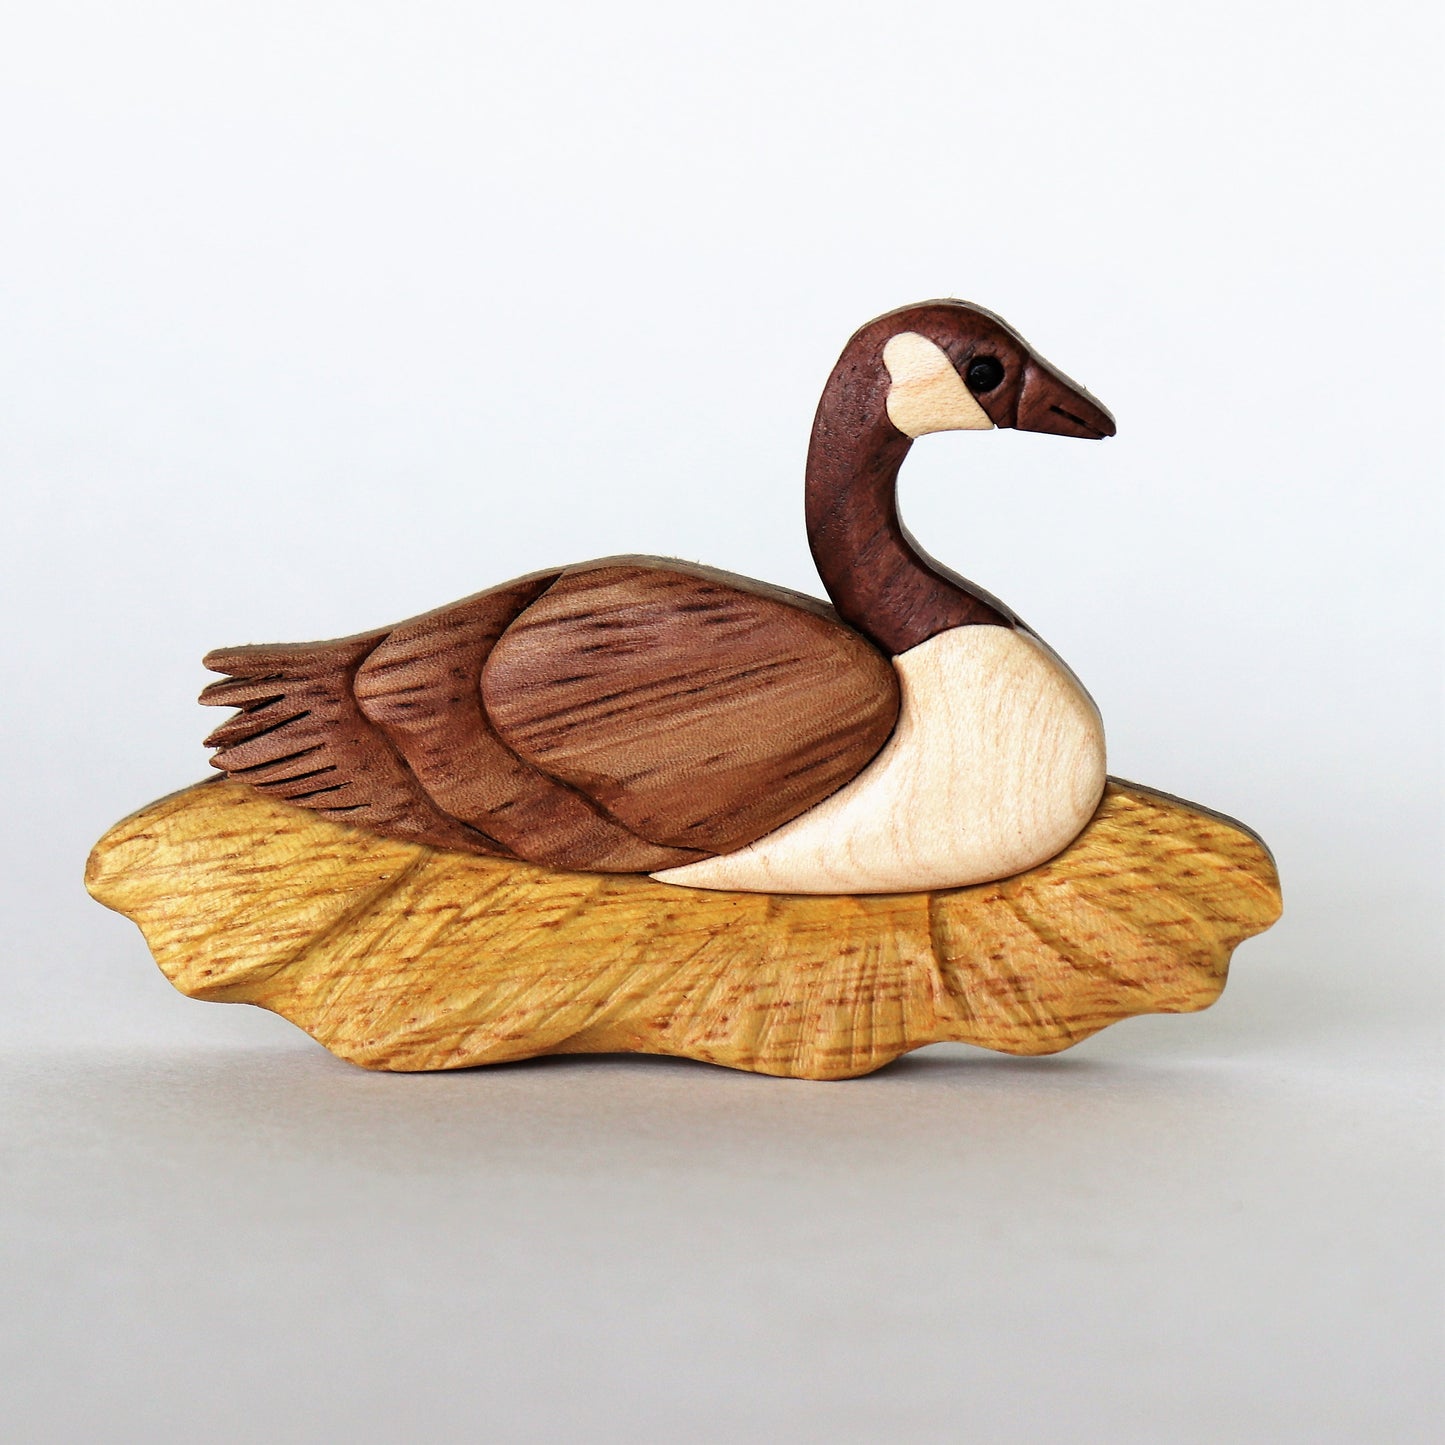 Canadian Goose Magnet / Ornament - 6th Day of Christmas